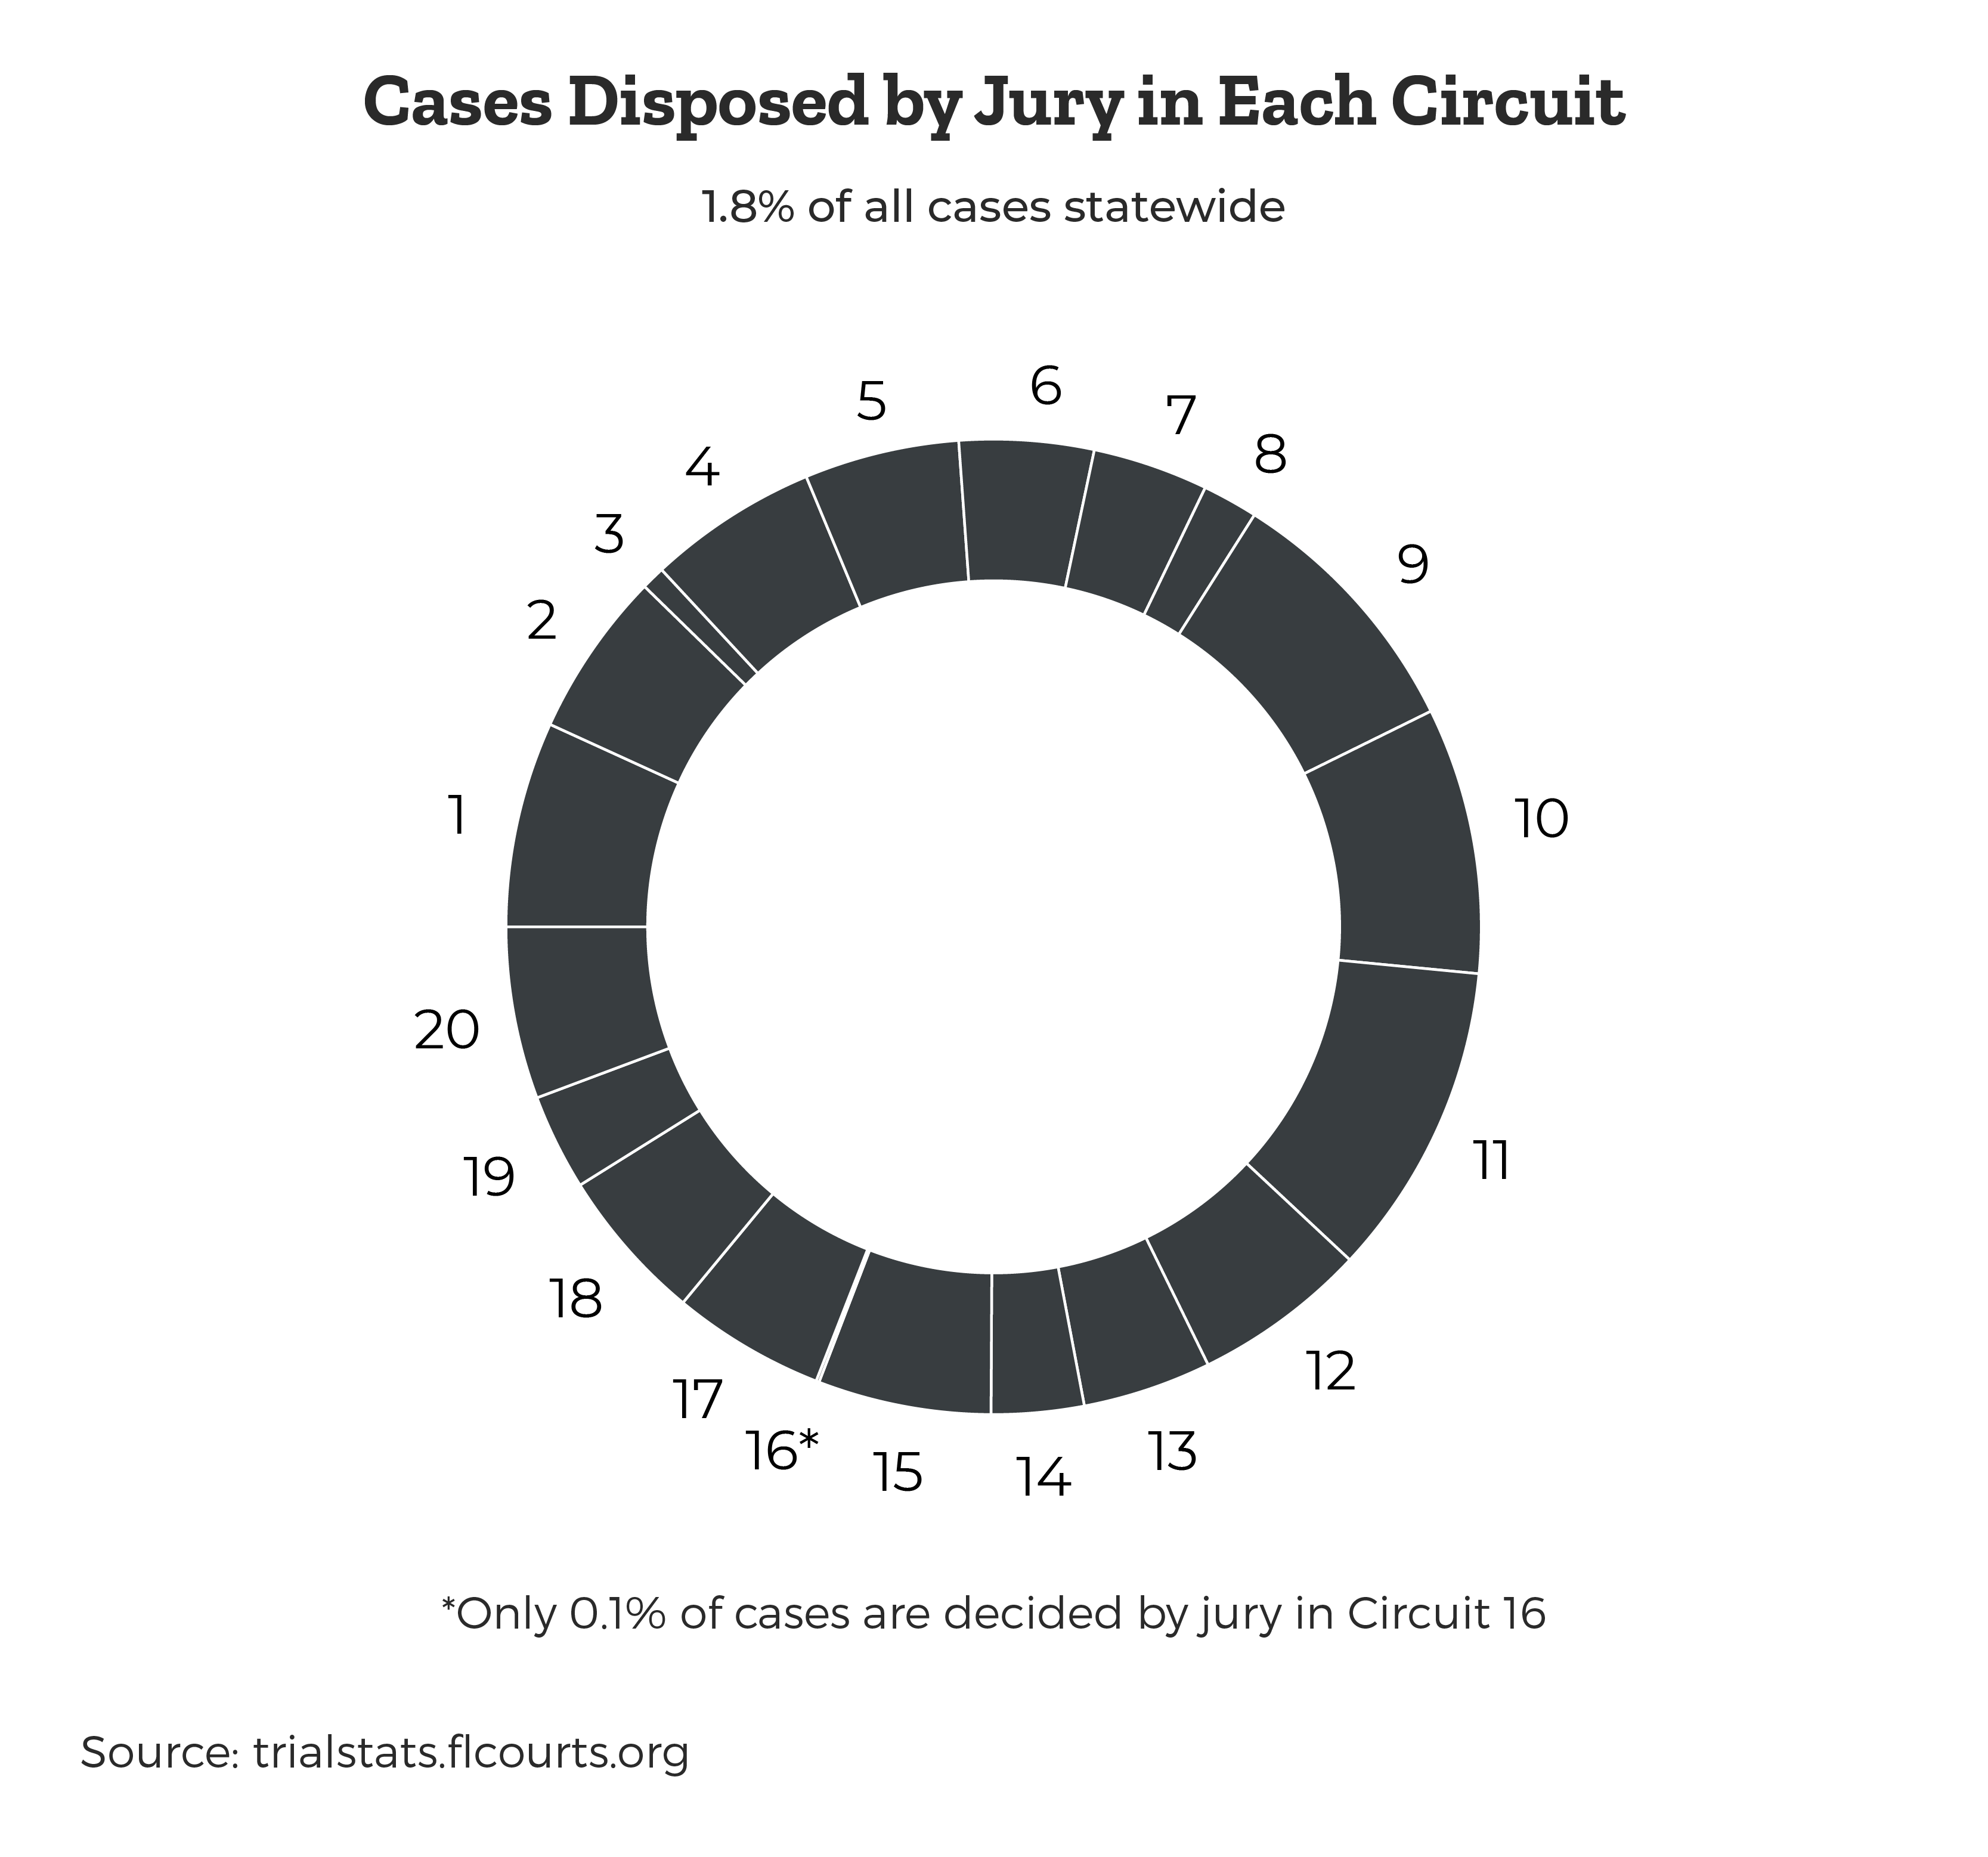 percent-cases-disposed-by-jury-by-circuit-0.1%-cases-in-circuit-16